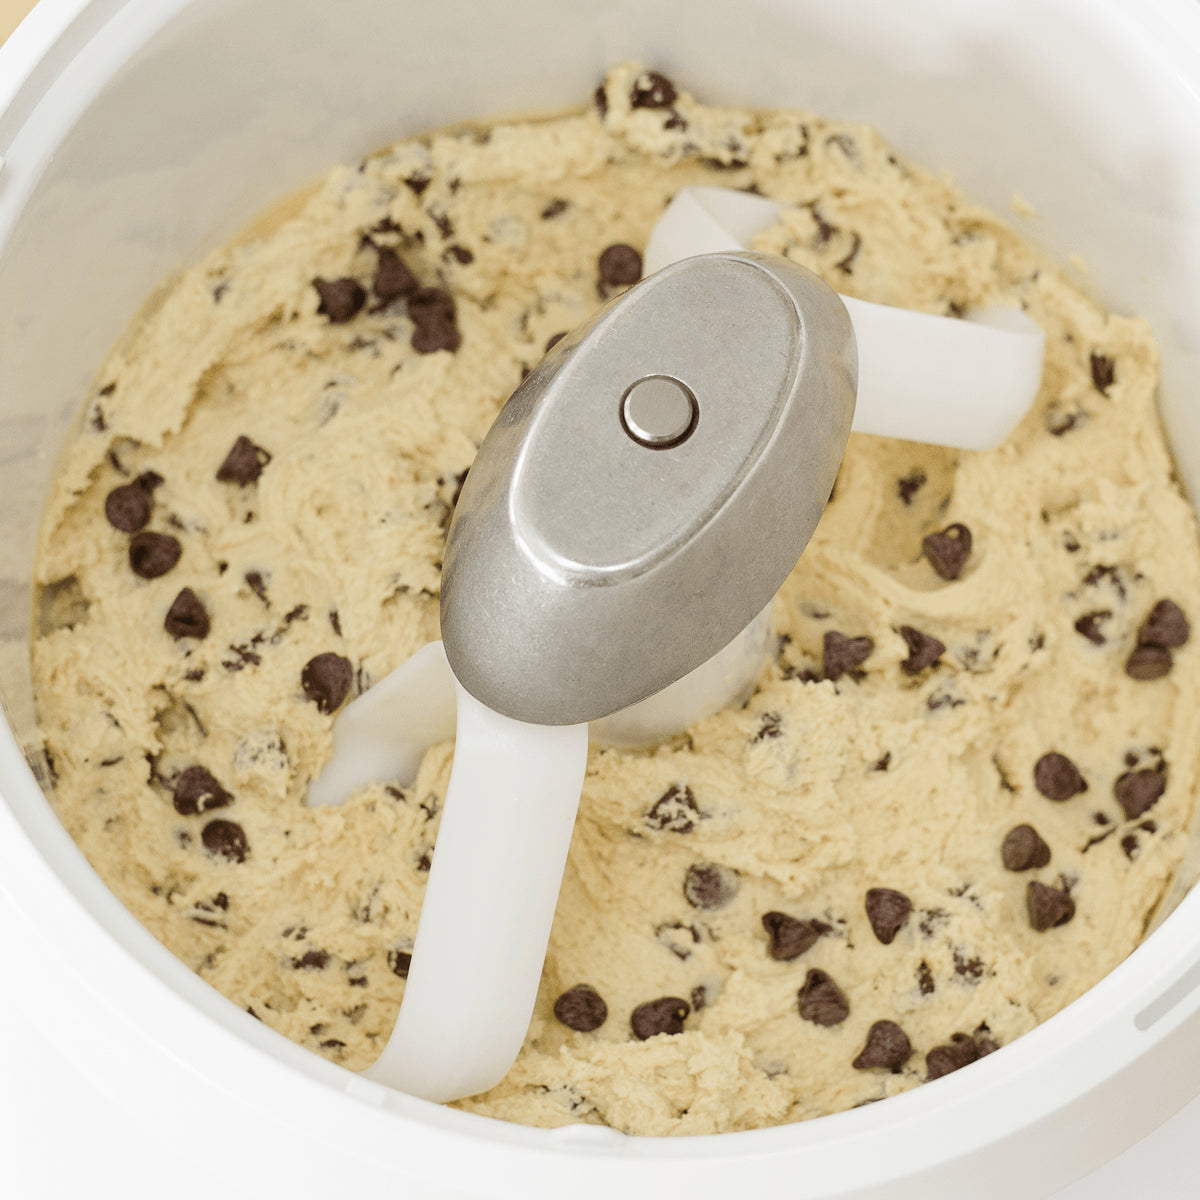 Bosch Universal Plus Mixer Cookie Paddles with Metal Driver